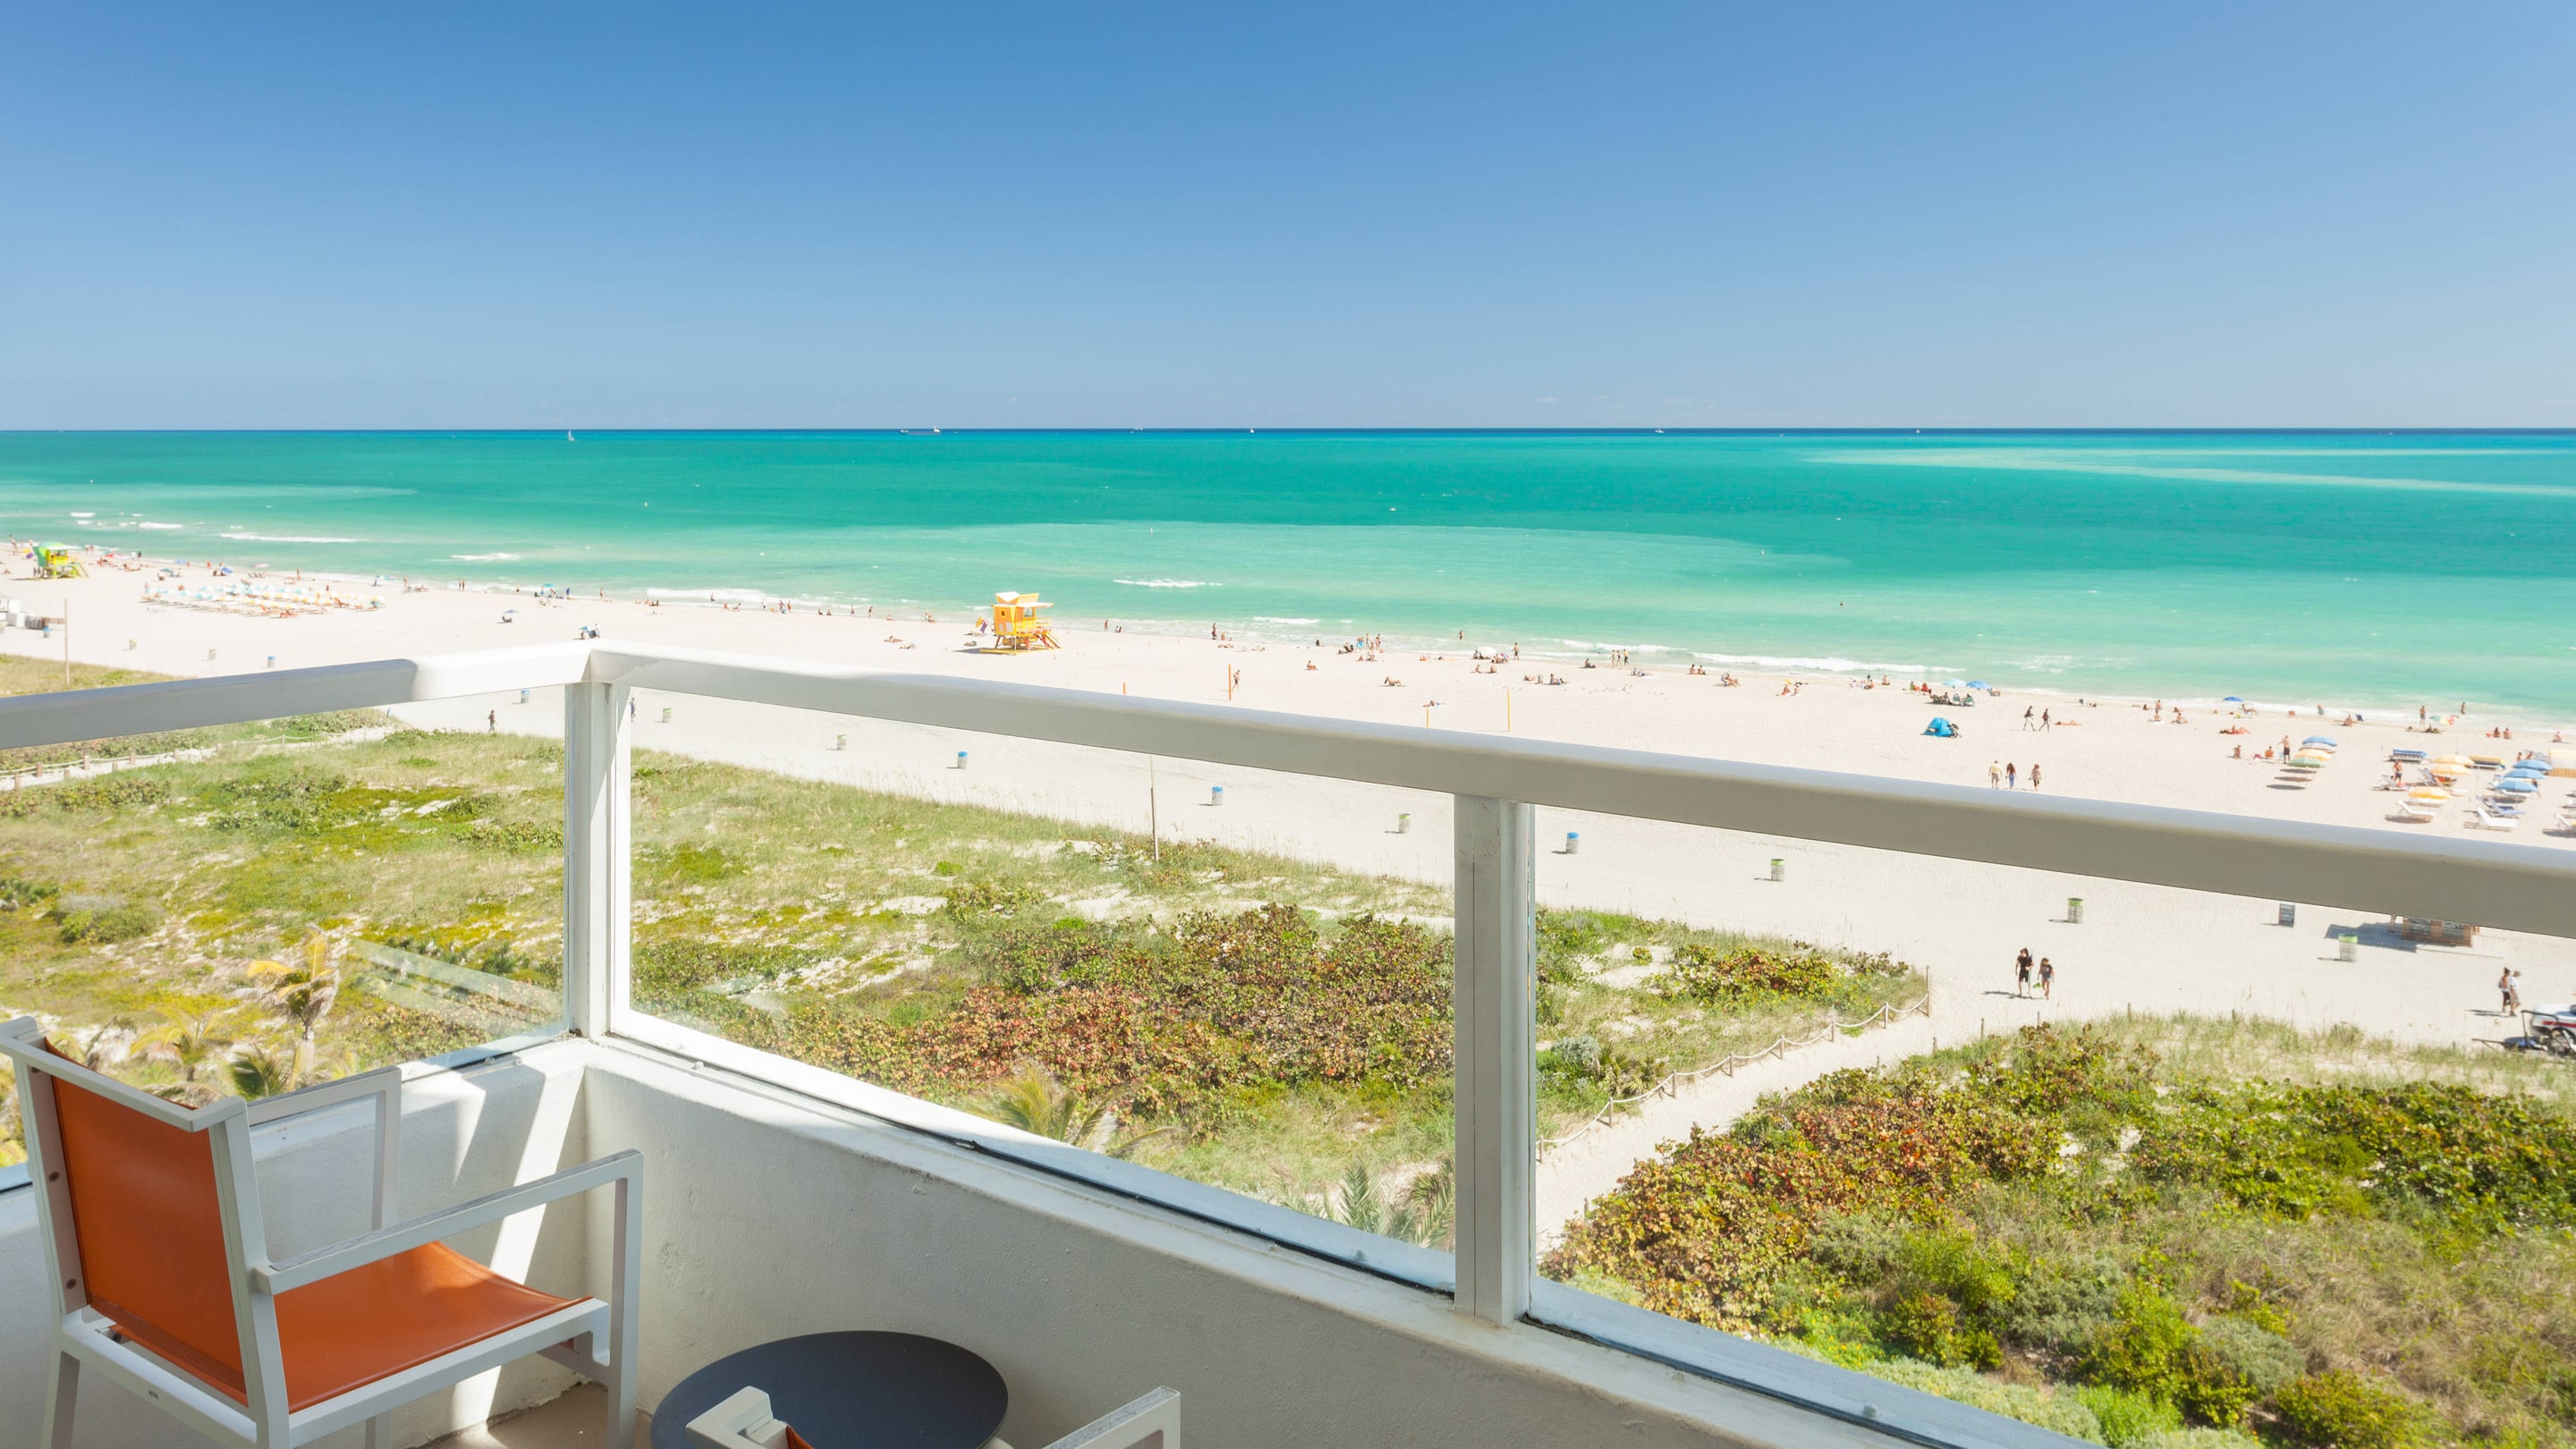 A balcony overlooking a beach next to bright blue water.